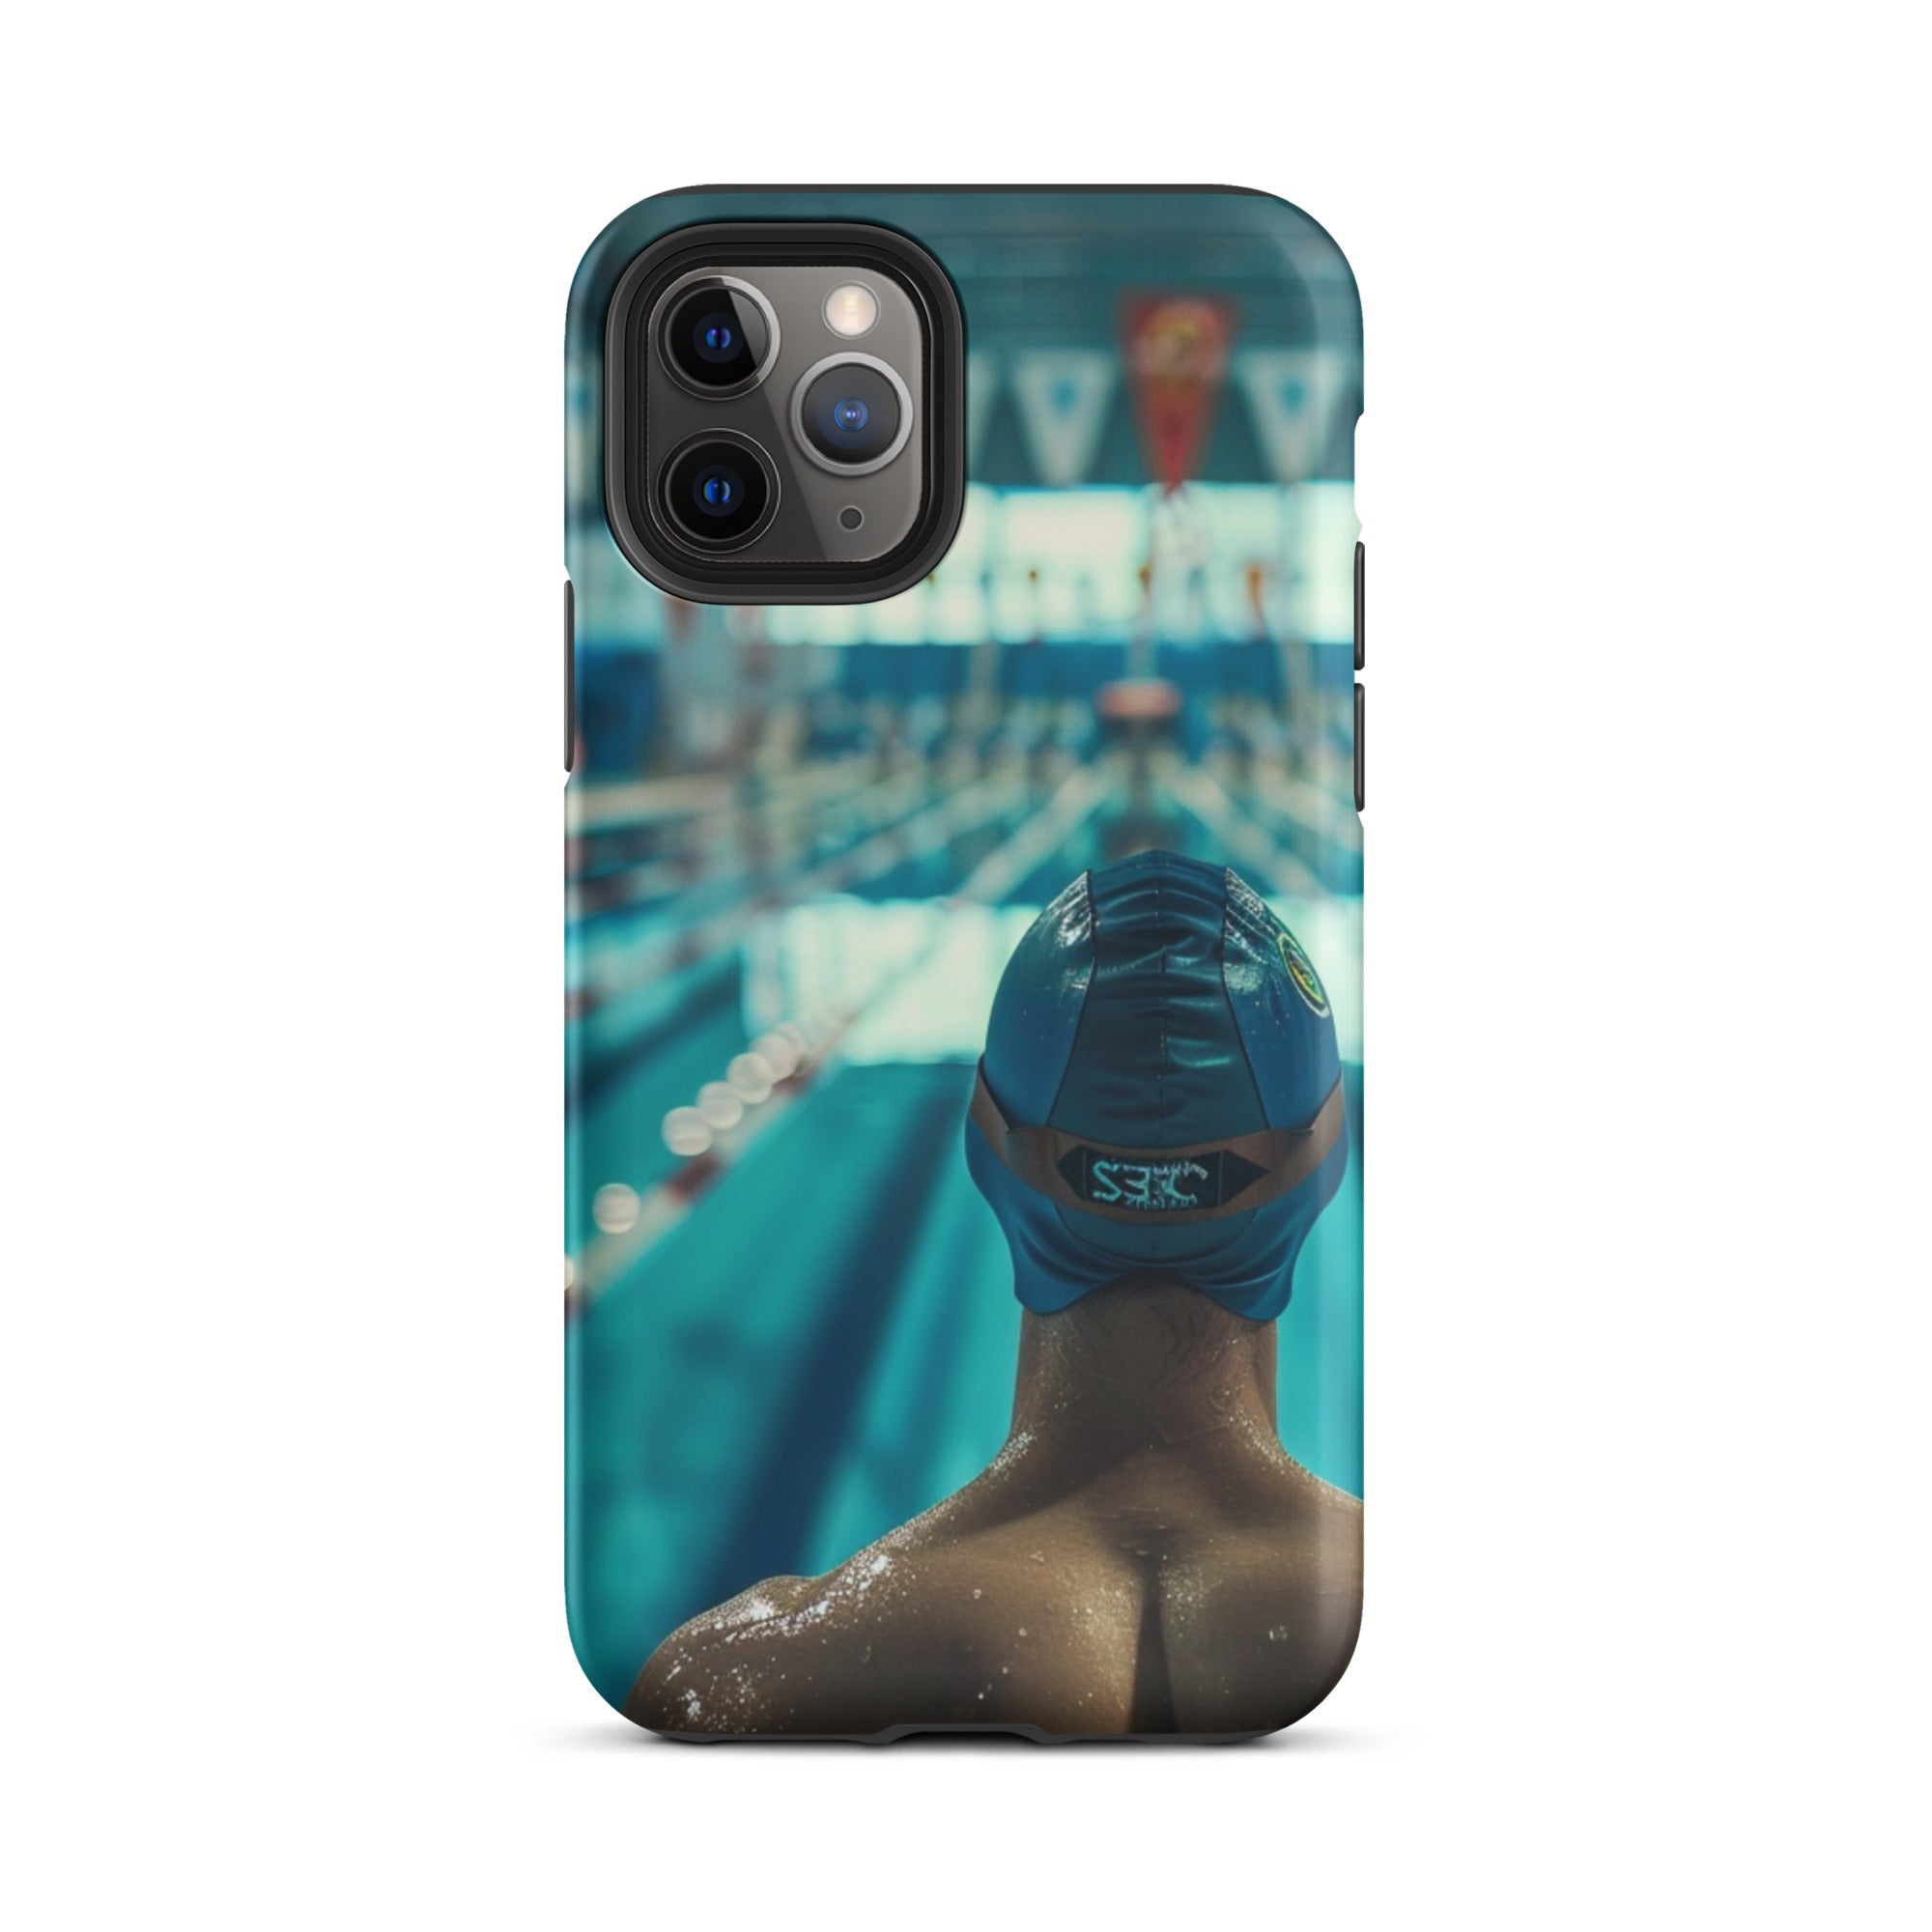 Tough iPhone Case for swimmers